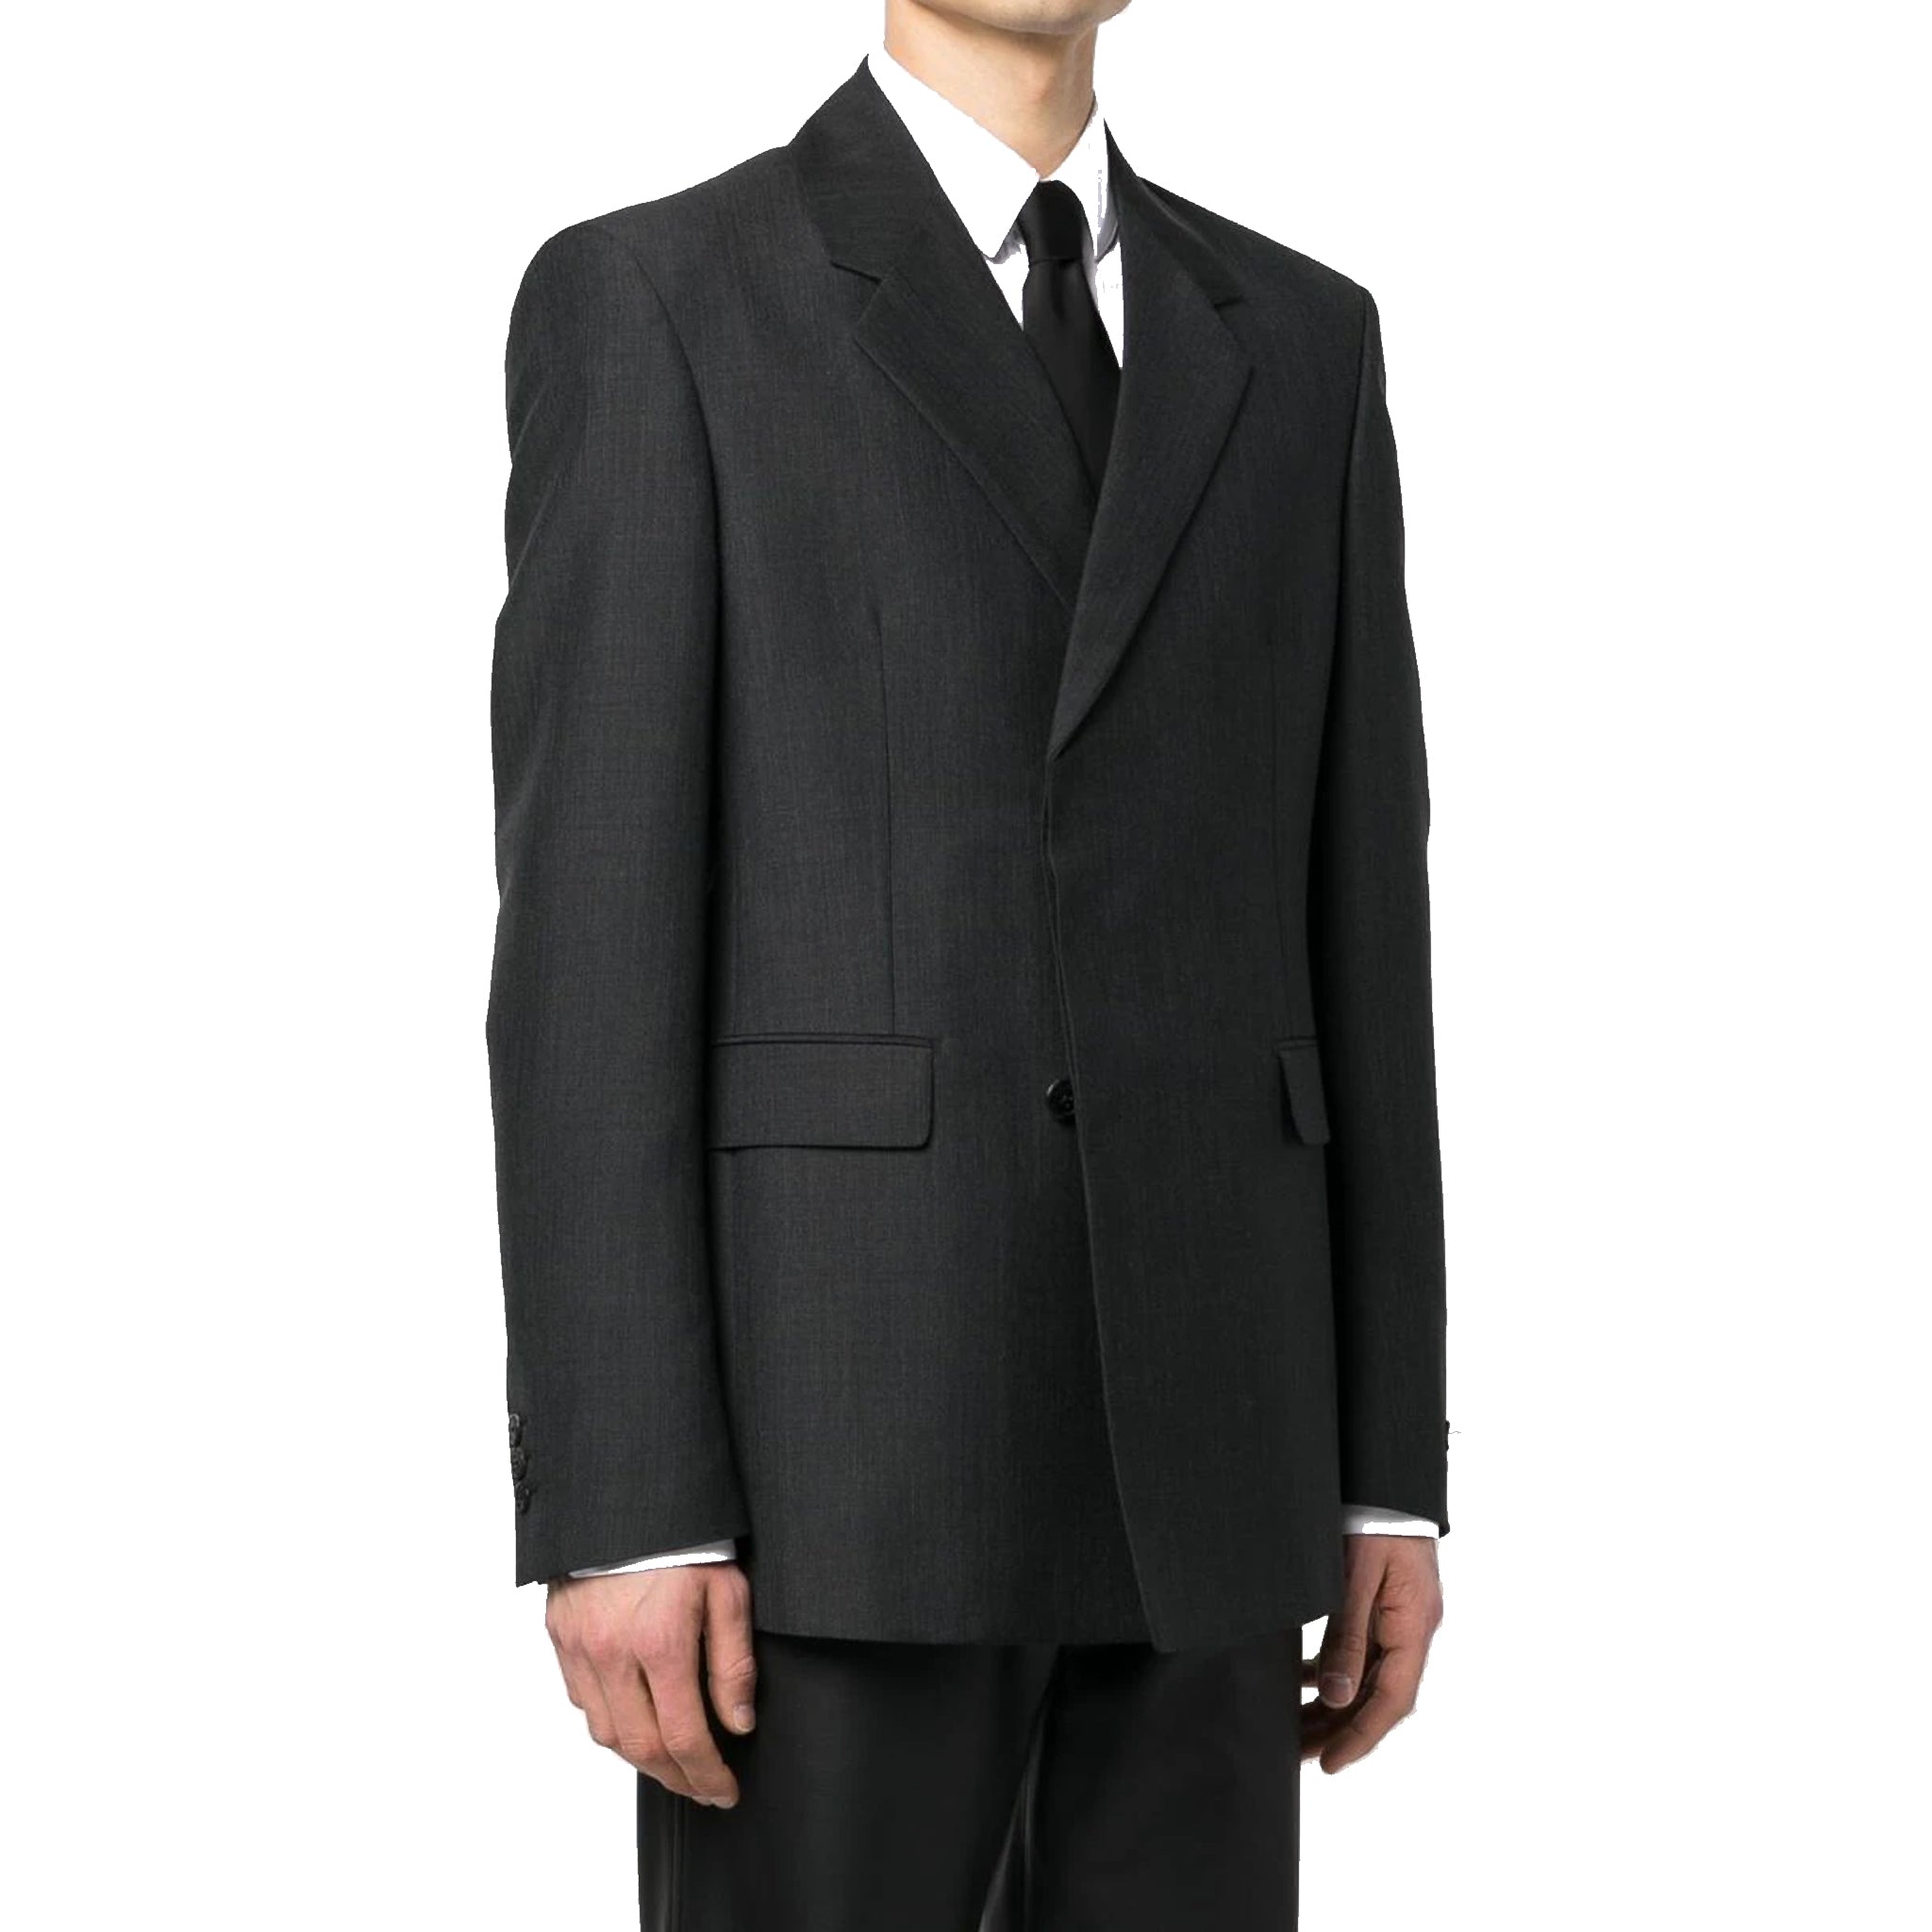 PRADA-Outlet-Sale-Prada Double-Breasted Wool Jacket-MEN CLOTHING-ARCHIVIST